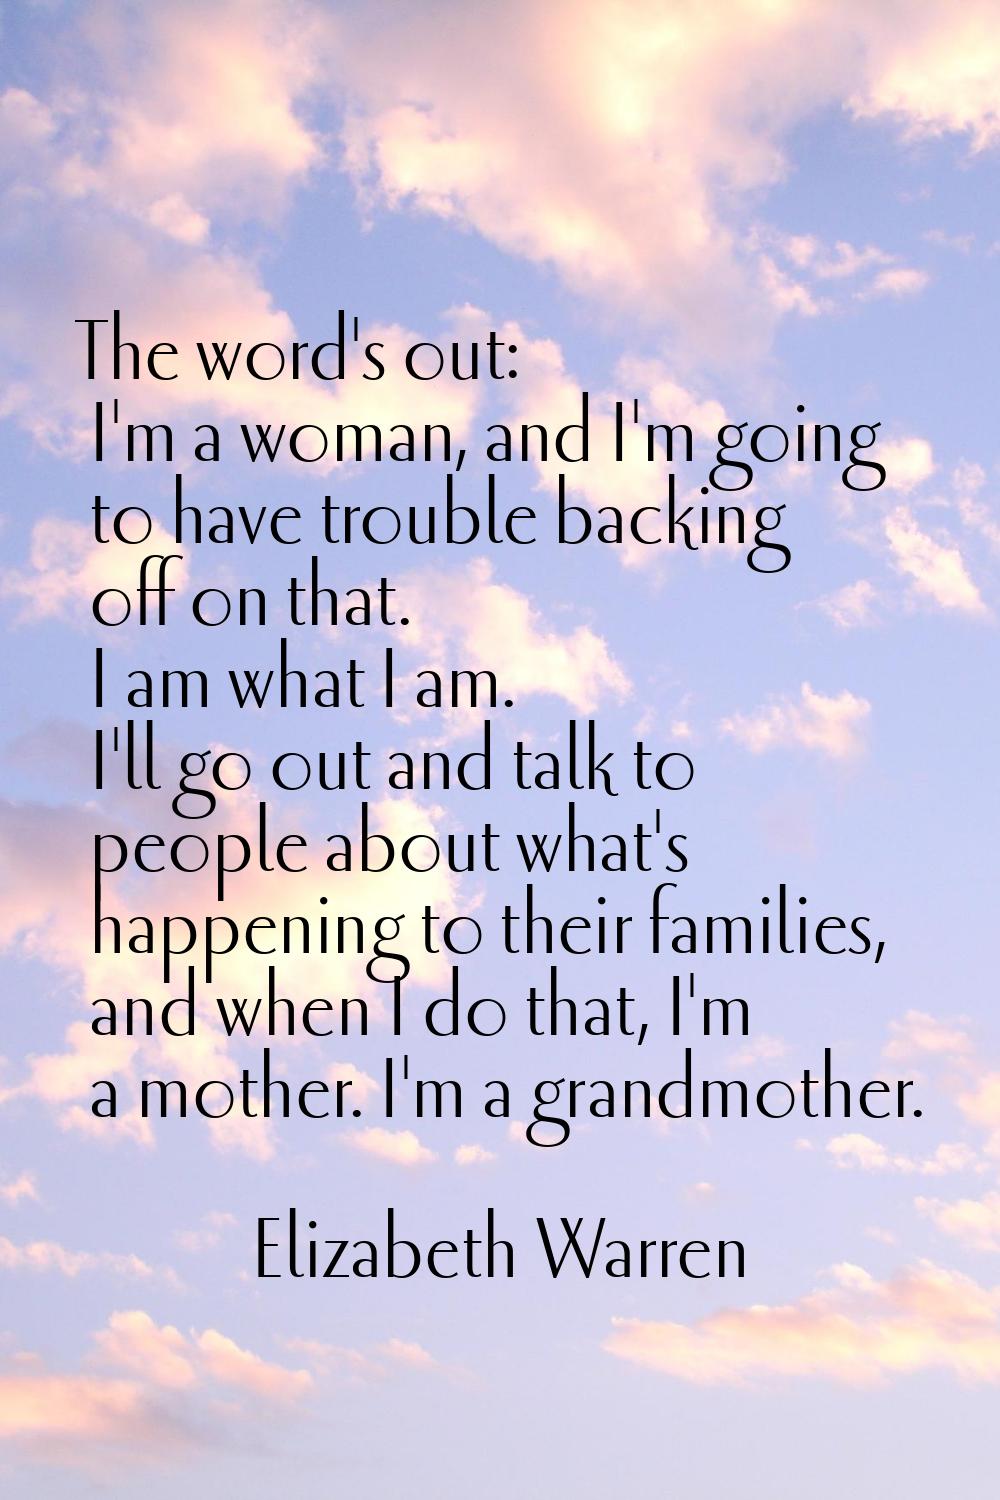 The word's out: I'm a woman, and I'm going to have trouble backing off on that. I am what I am. I'l